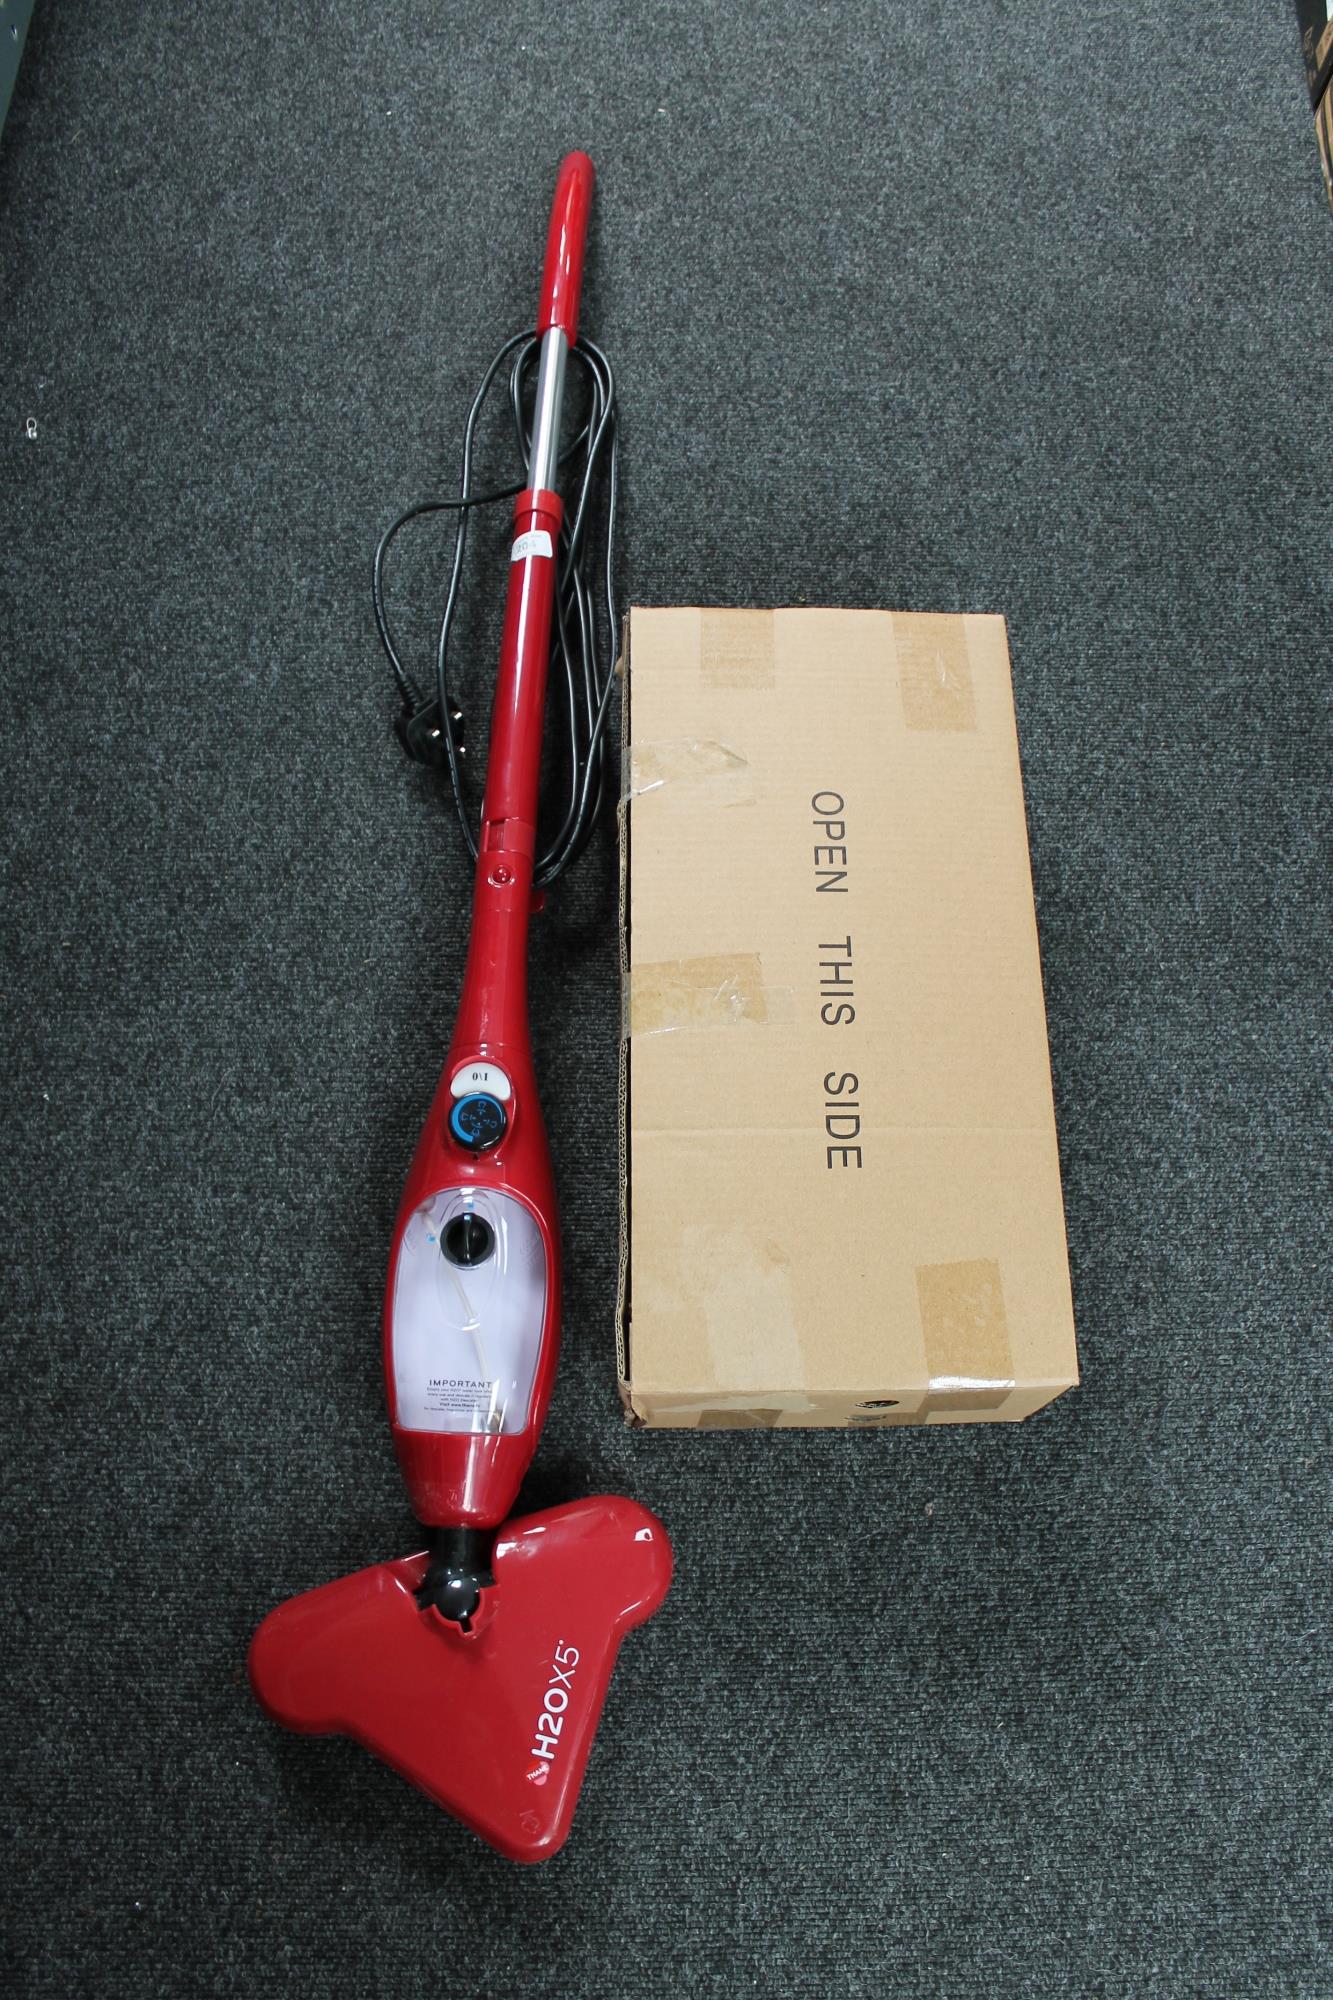 A Thane 20 x 5 steam cleaner with box of accessories